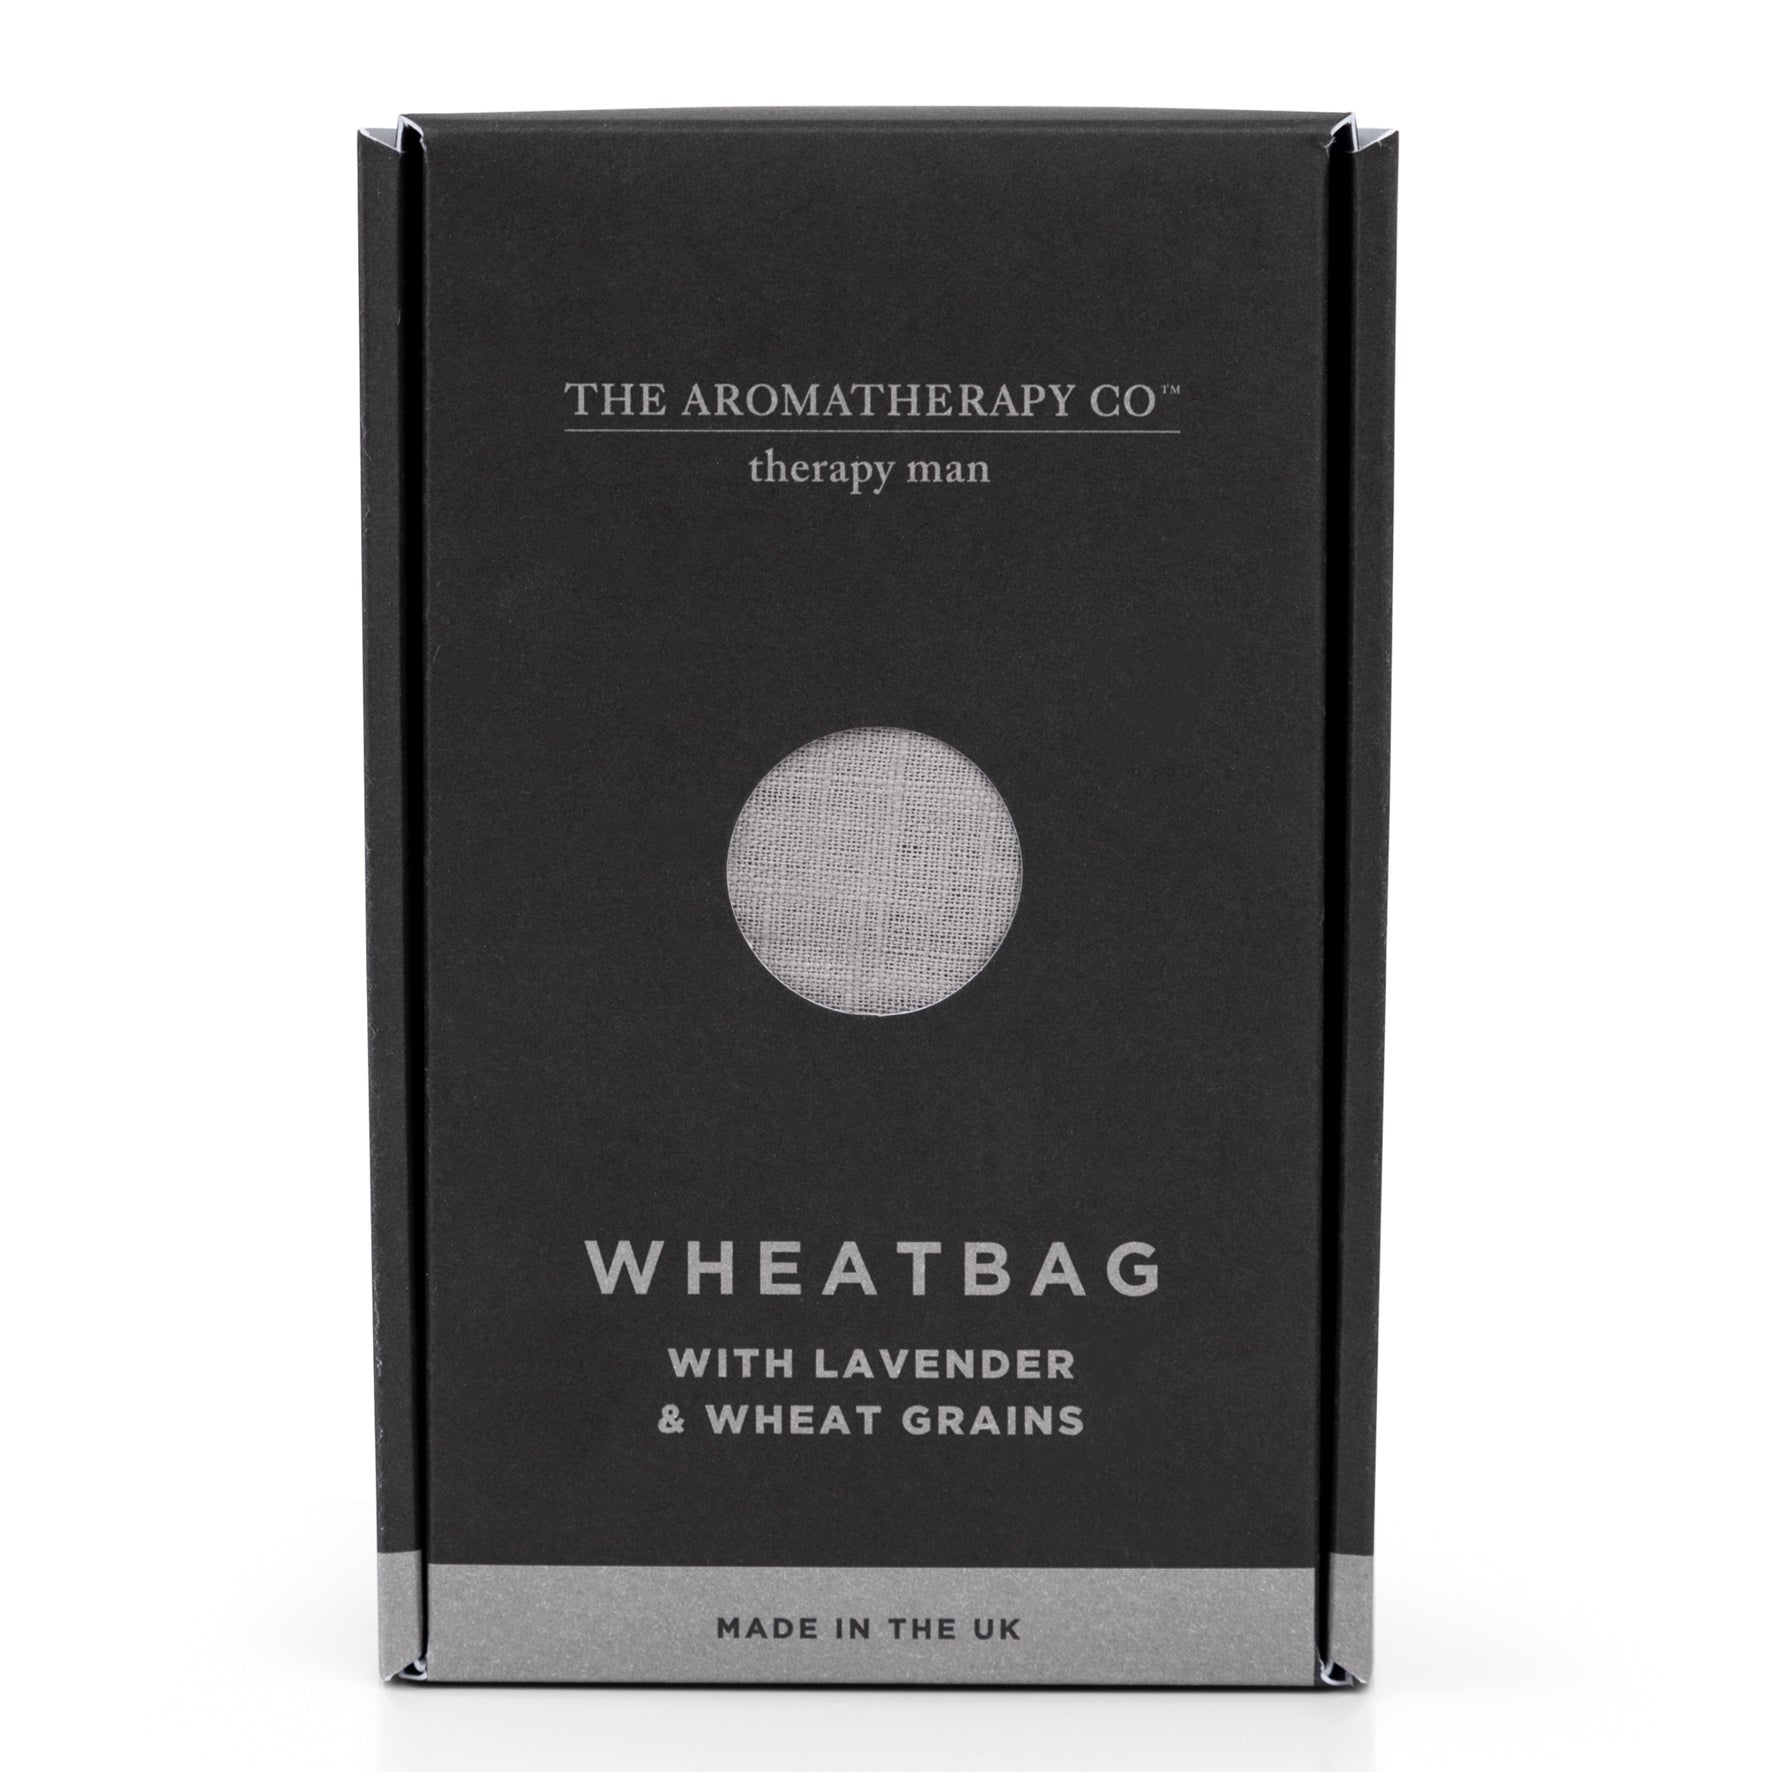 The Aromatherapy Co Therapy Man Soothing Wheat Bag With Lavender and Wheat Grains